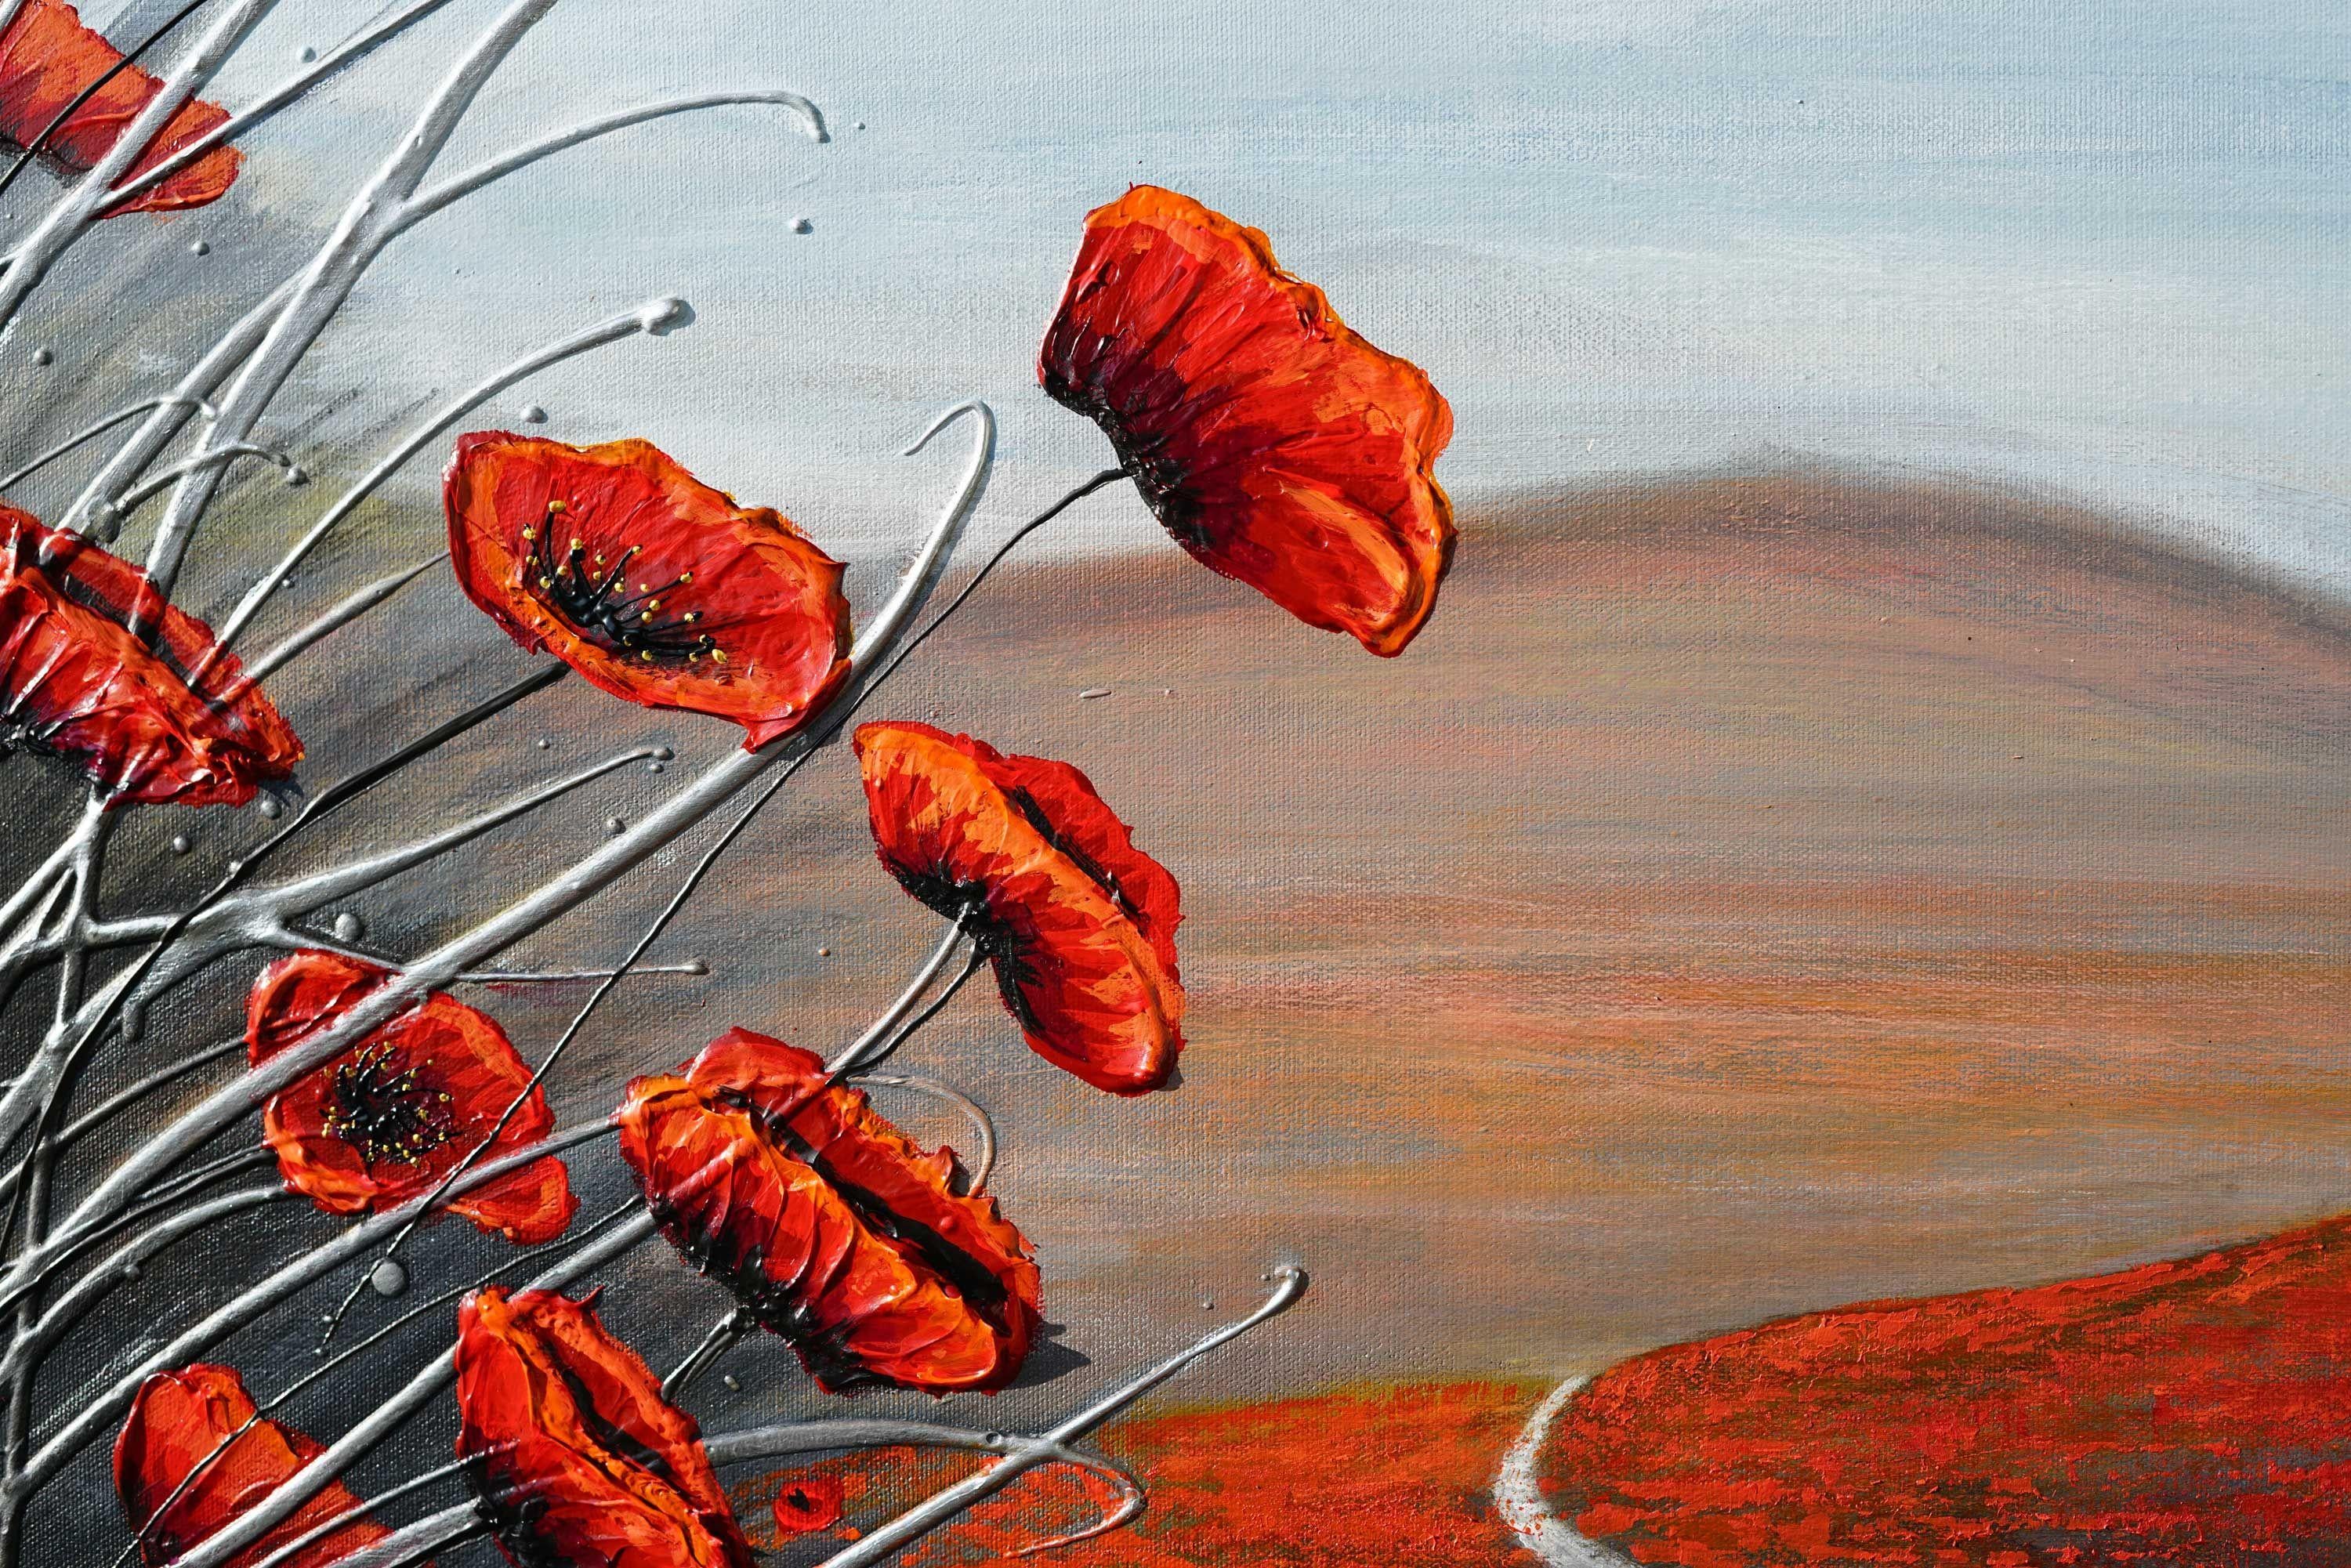 Original beautiful textured red poppy flower landscape on canvas. 100% Handmade     TITLE: The Walk Through the Poppies    MEDIUM: High-quality professional acrylic paints. Varnished for protection and longevity.     SURFACE: Painted on a deep edge